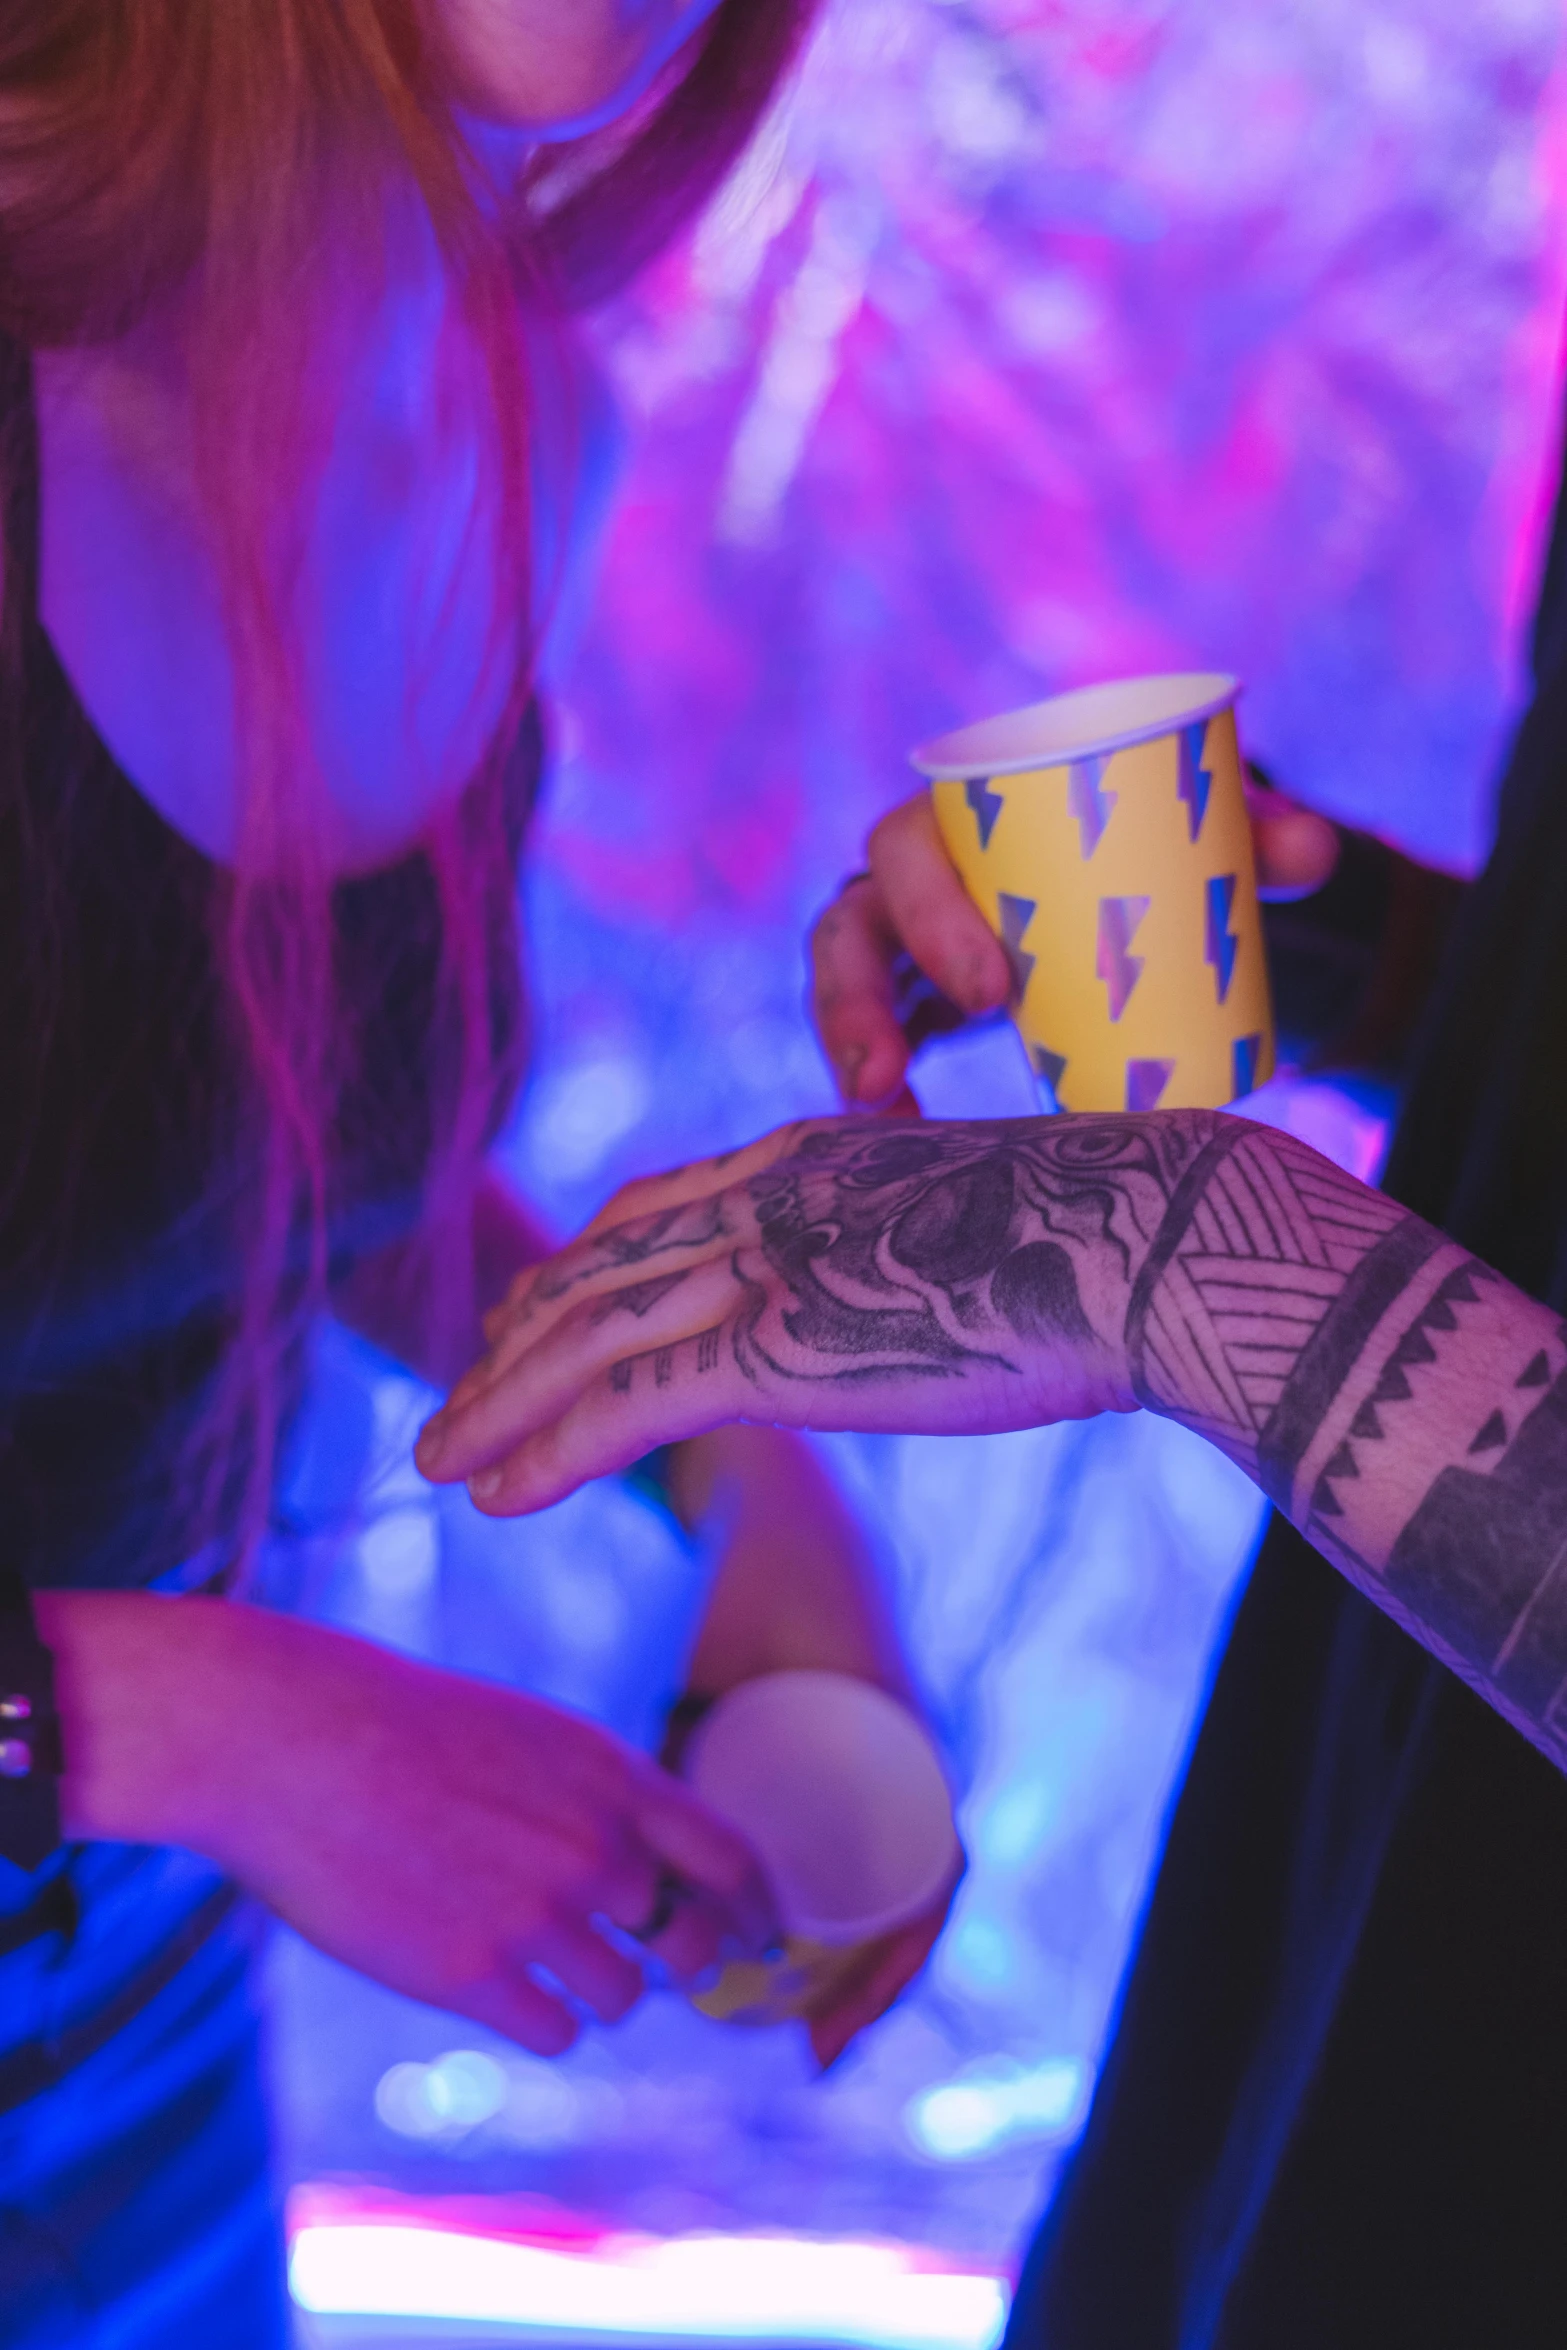 some very pretty tattooed hands with some cups